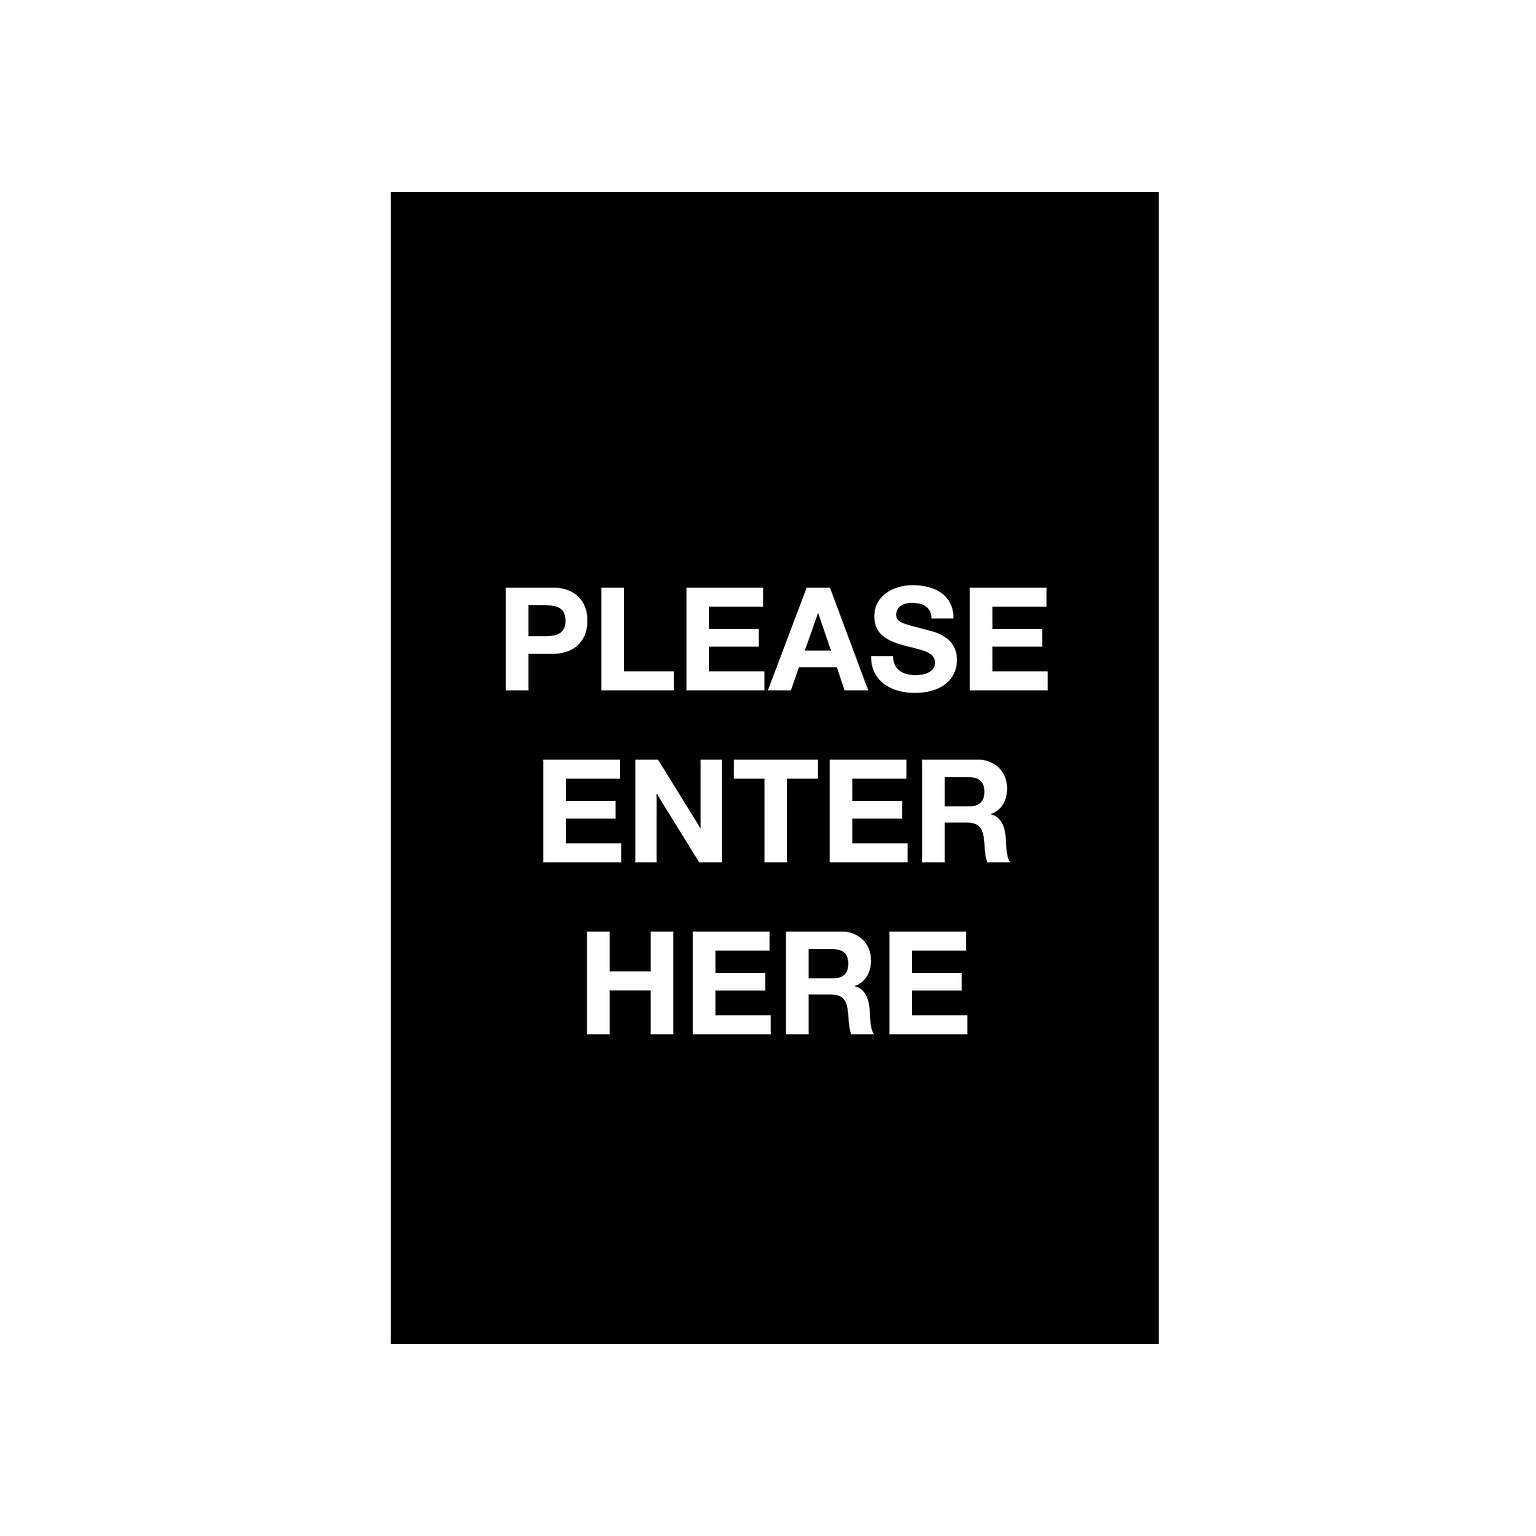 Queue Solutions Please Enter Here Temporary Traffic Control Sign, 7 x 11, Black/White (S711B-01)